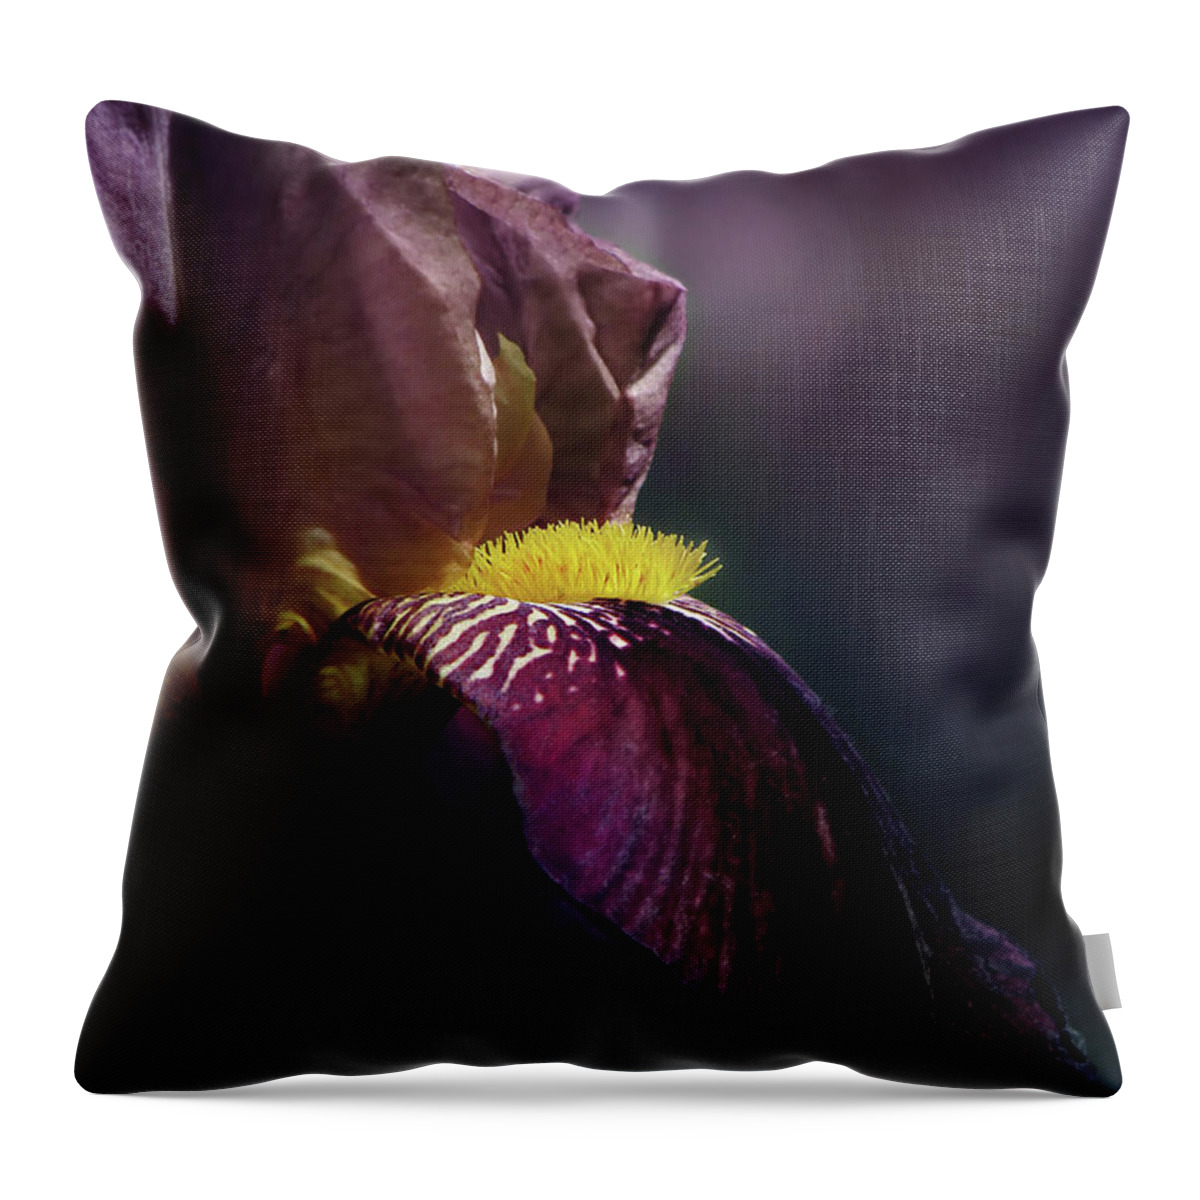 Flower Throw Pillow featuring the photograph Royal Flush by John Poon